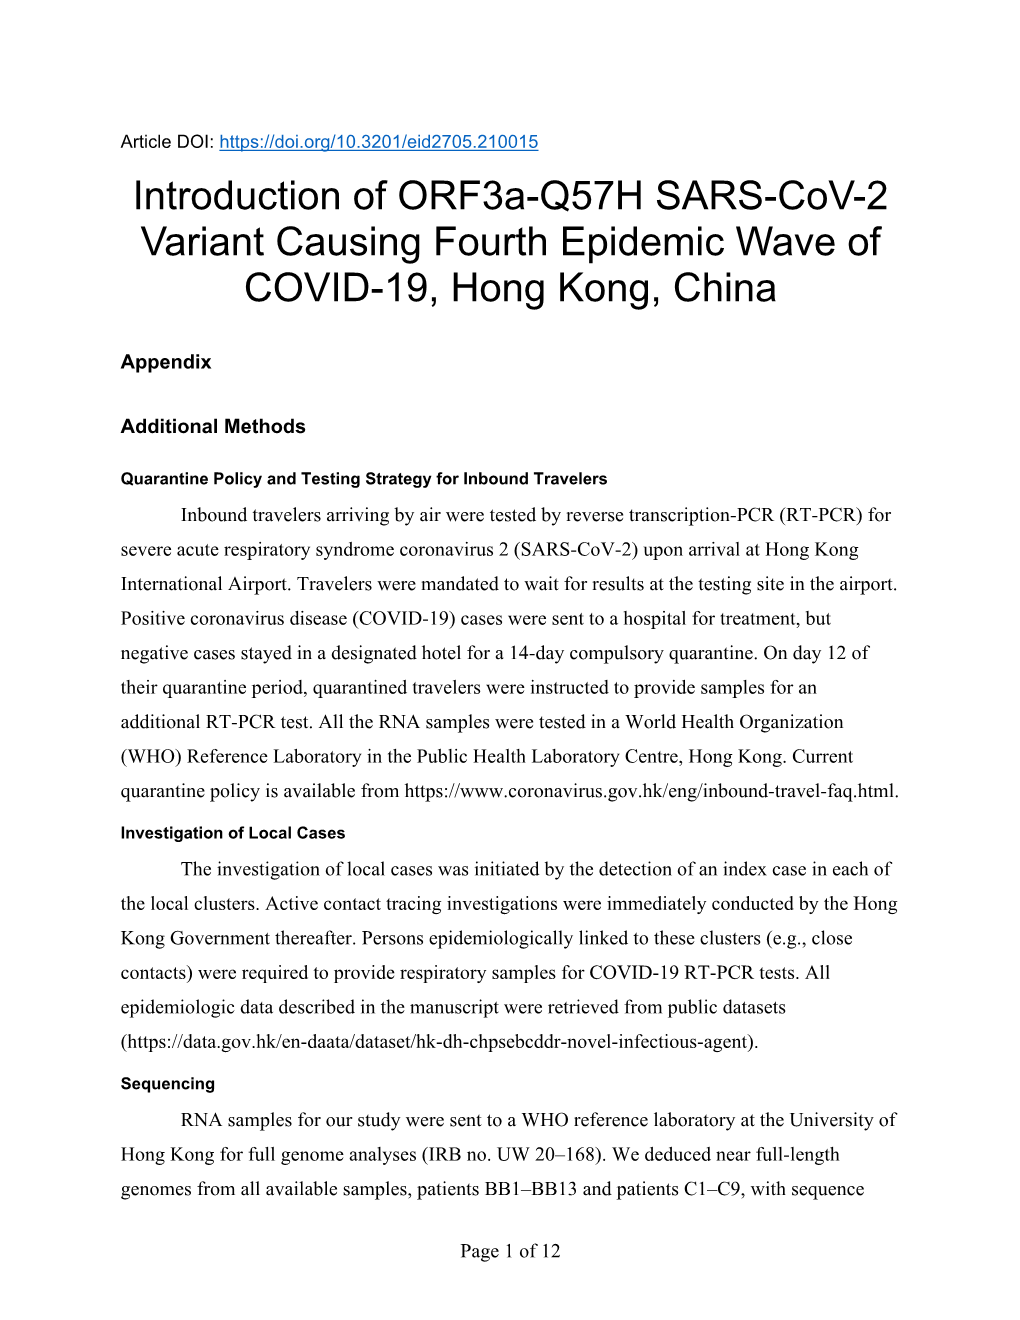 Introduction of Orf3a-Q57H SARS-Cov-2 Variant Causing Fourth Epidemic Wave of COVID-19, Hong Kong, China